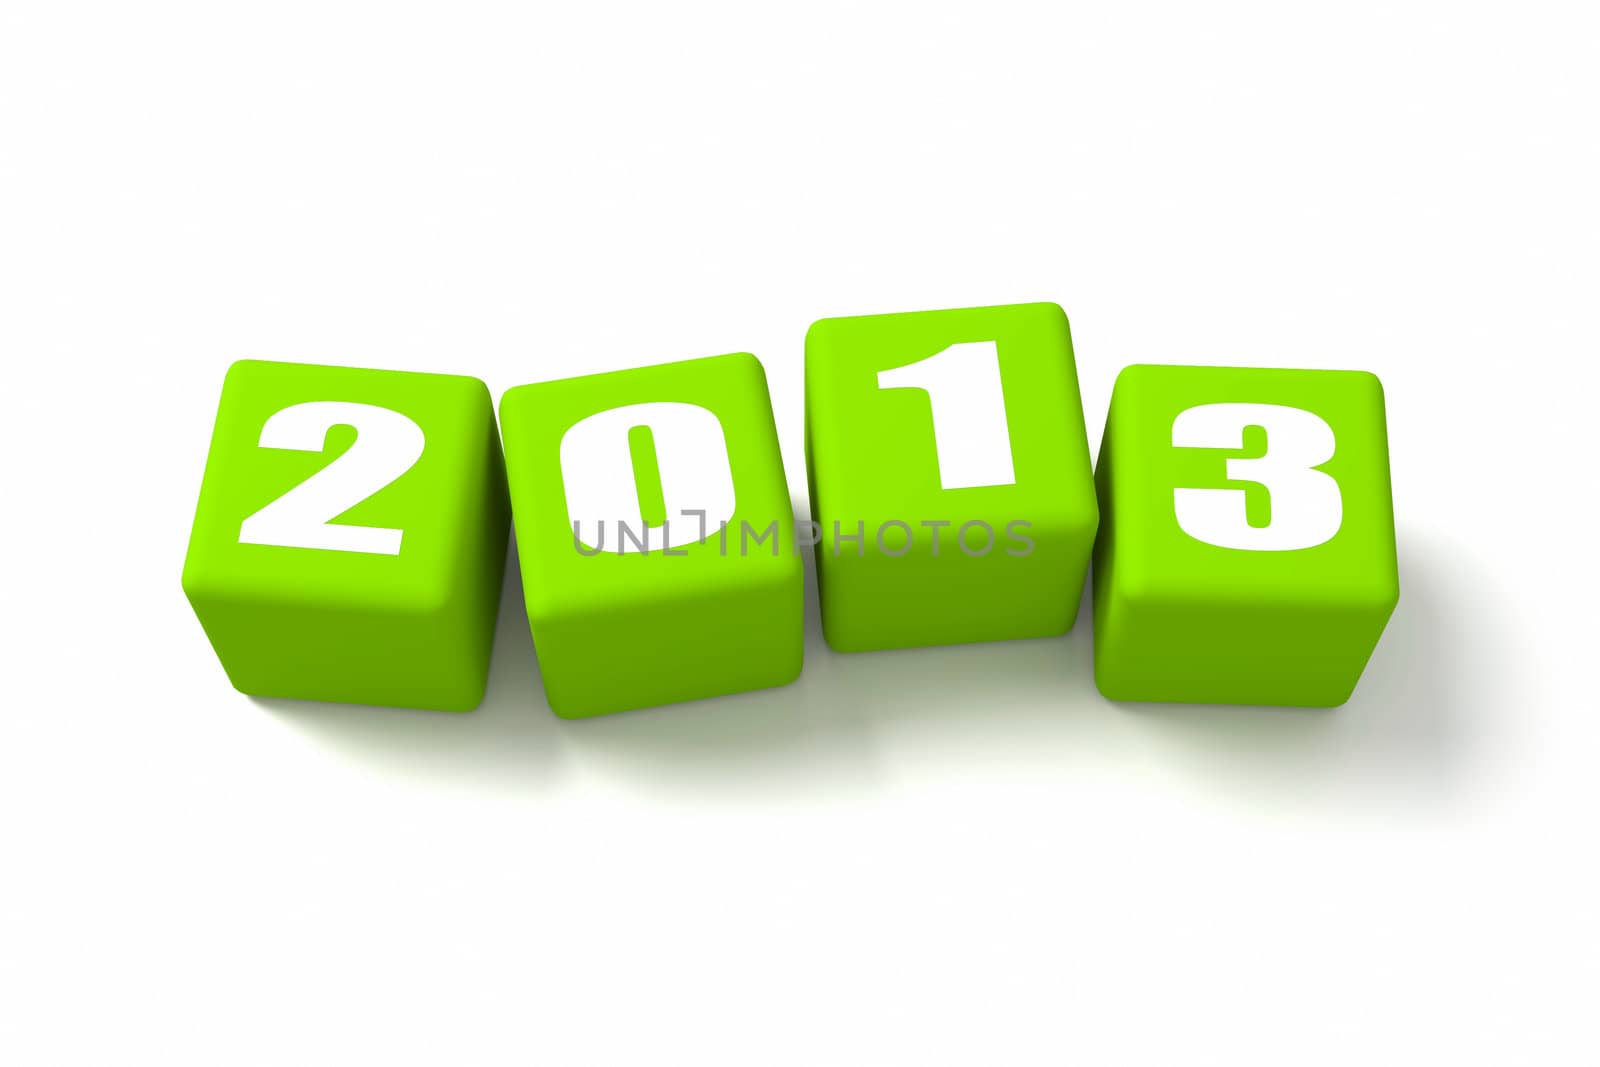 New Year 2013 Green Cubes by OutStyle